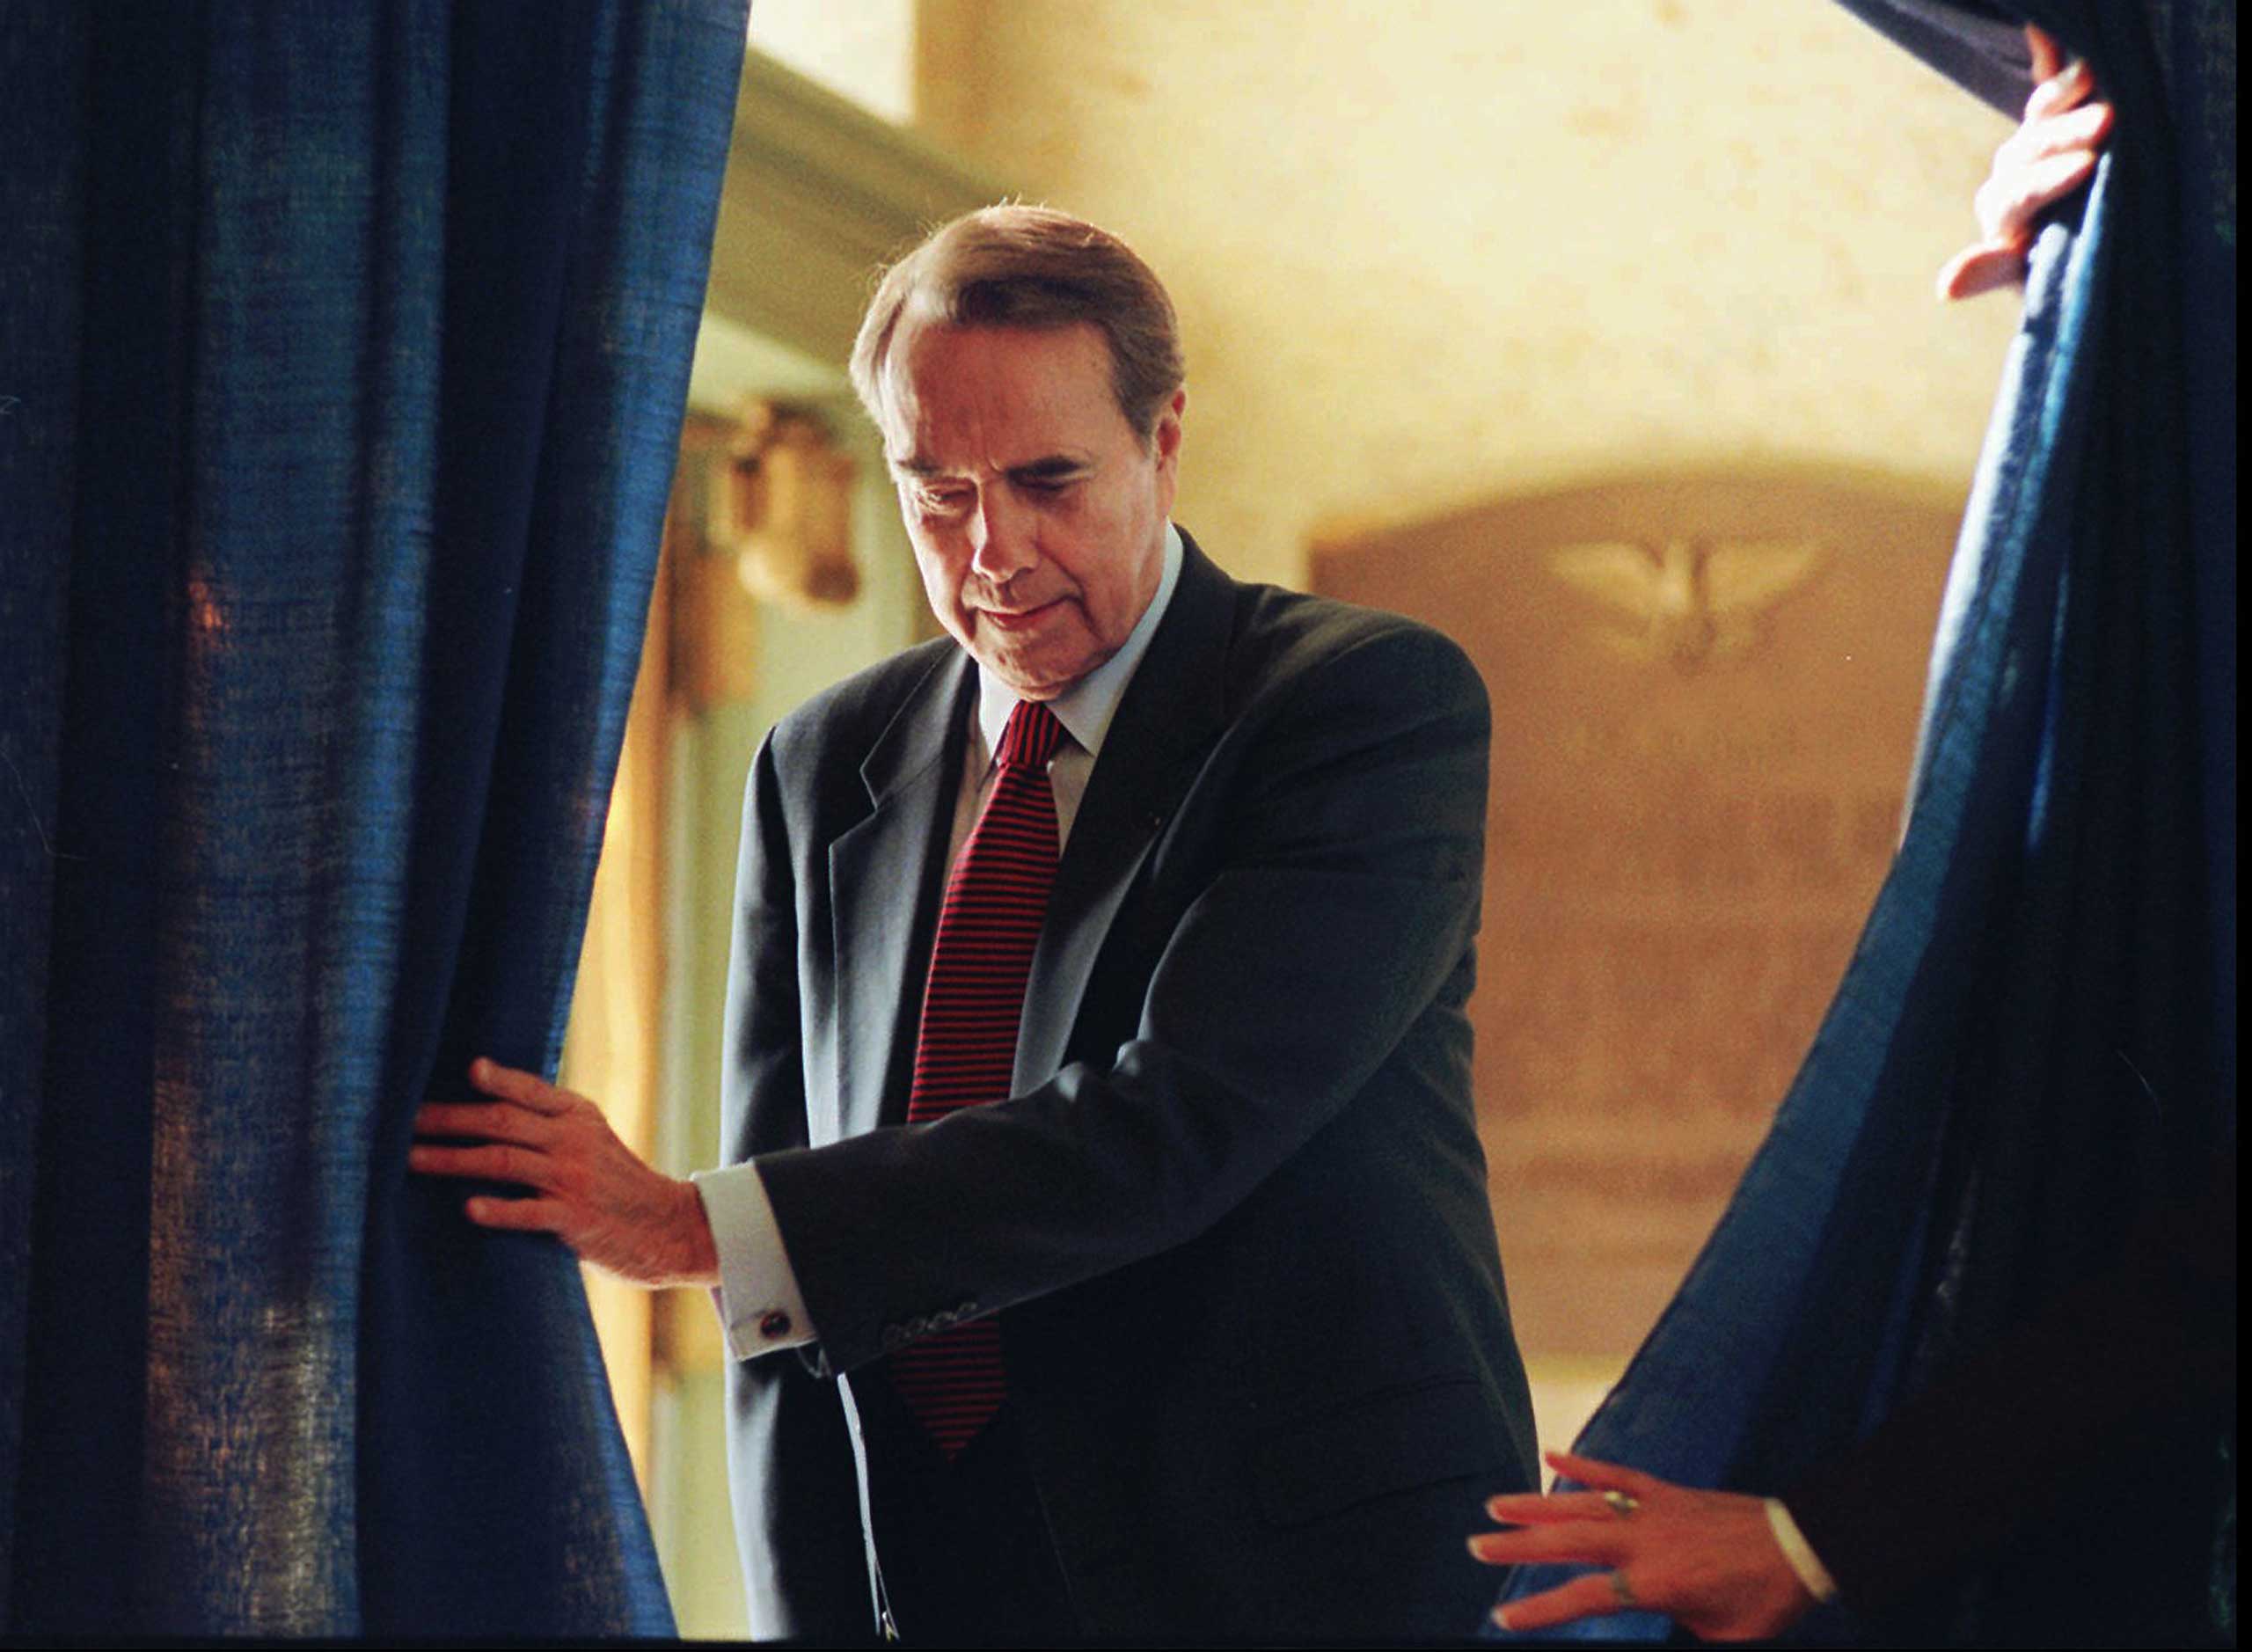 Sen. Bob Dole gave the response to Clinton in 1996. Later that year, he ran against Clinton and lost. (Charlie Neibergall—AP)